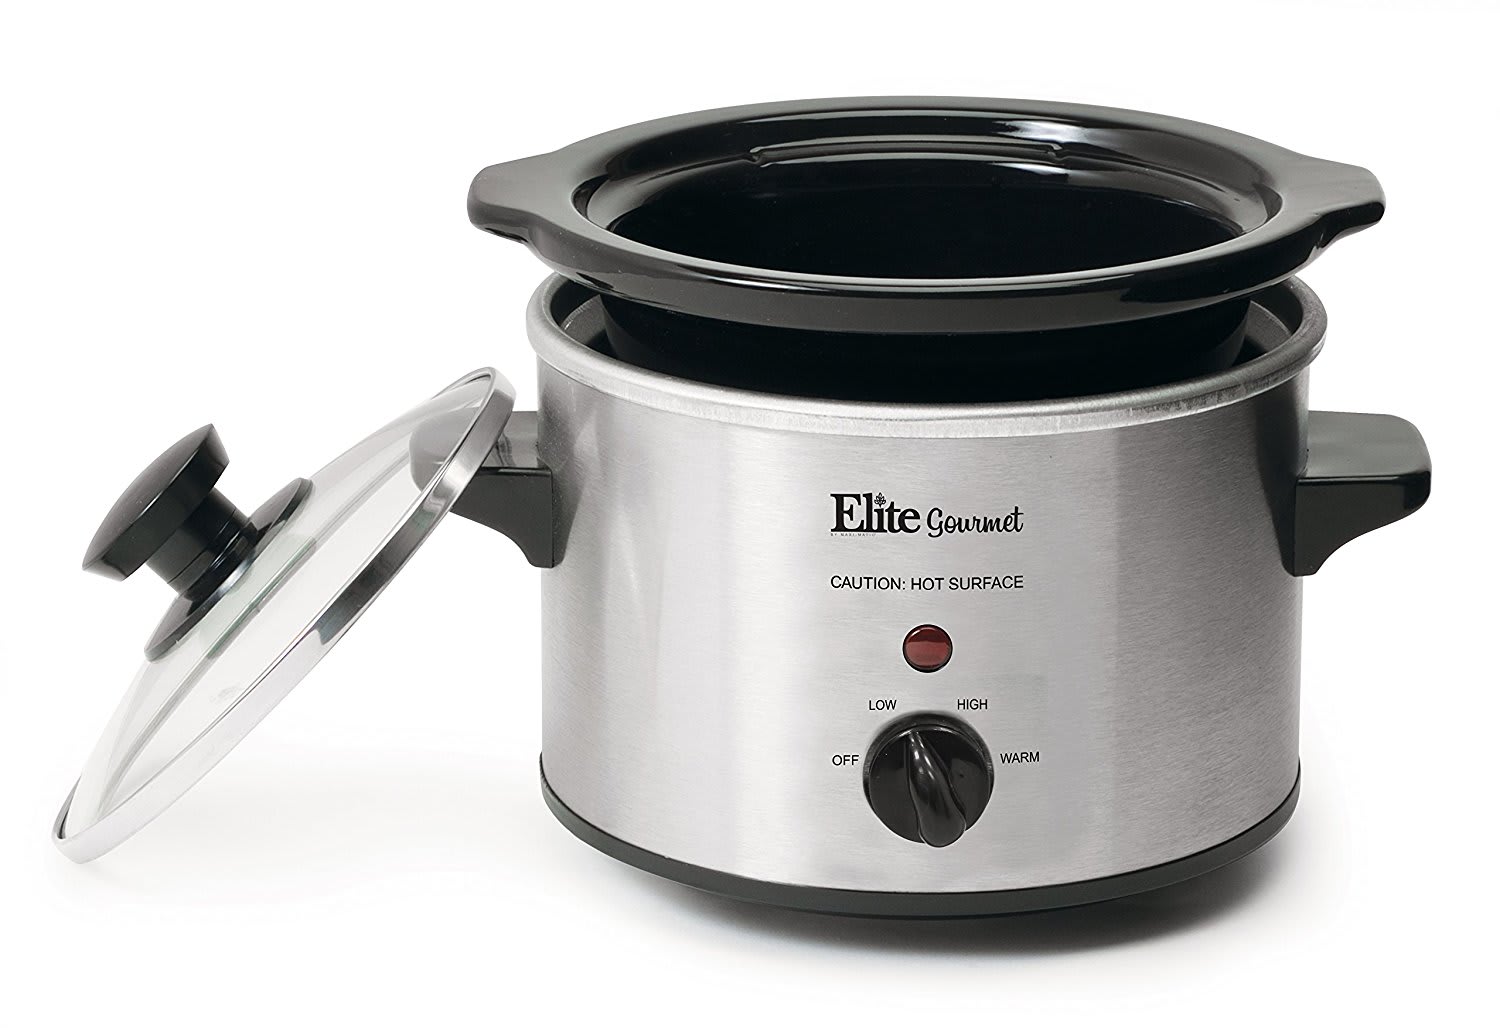 computer udvande Snor The 7 best Crock-Pots and slow cookers to buy in 2018